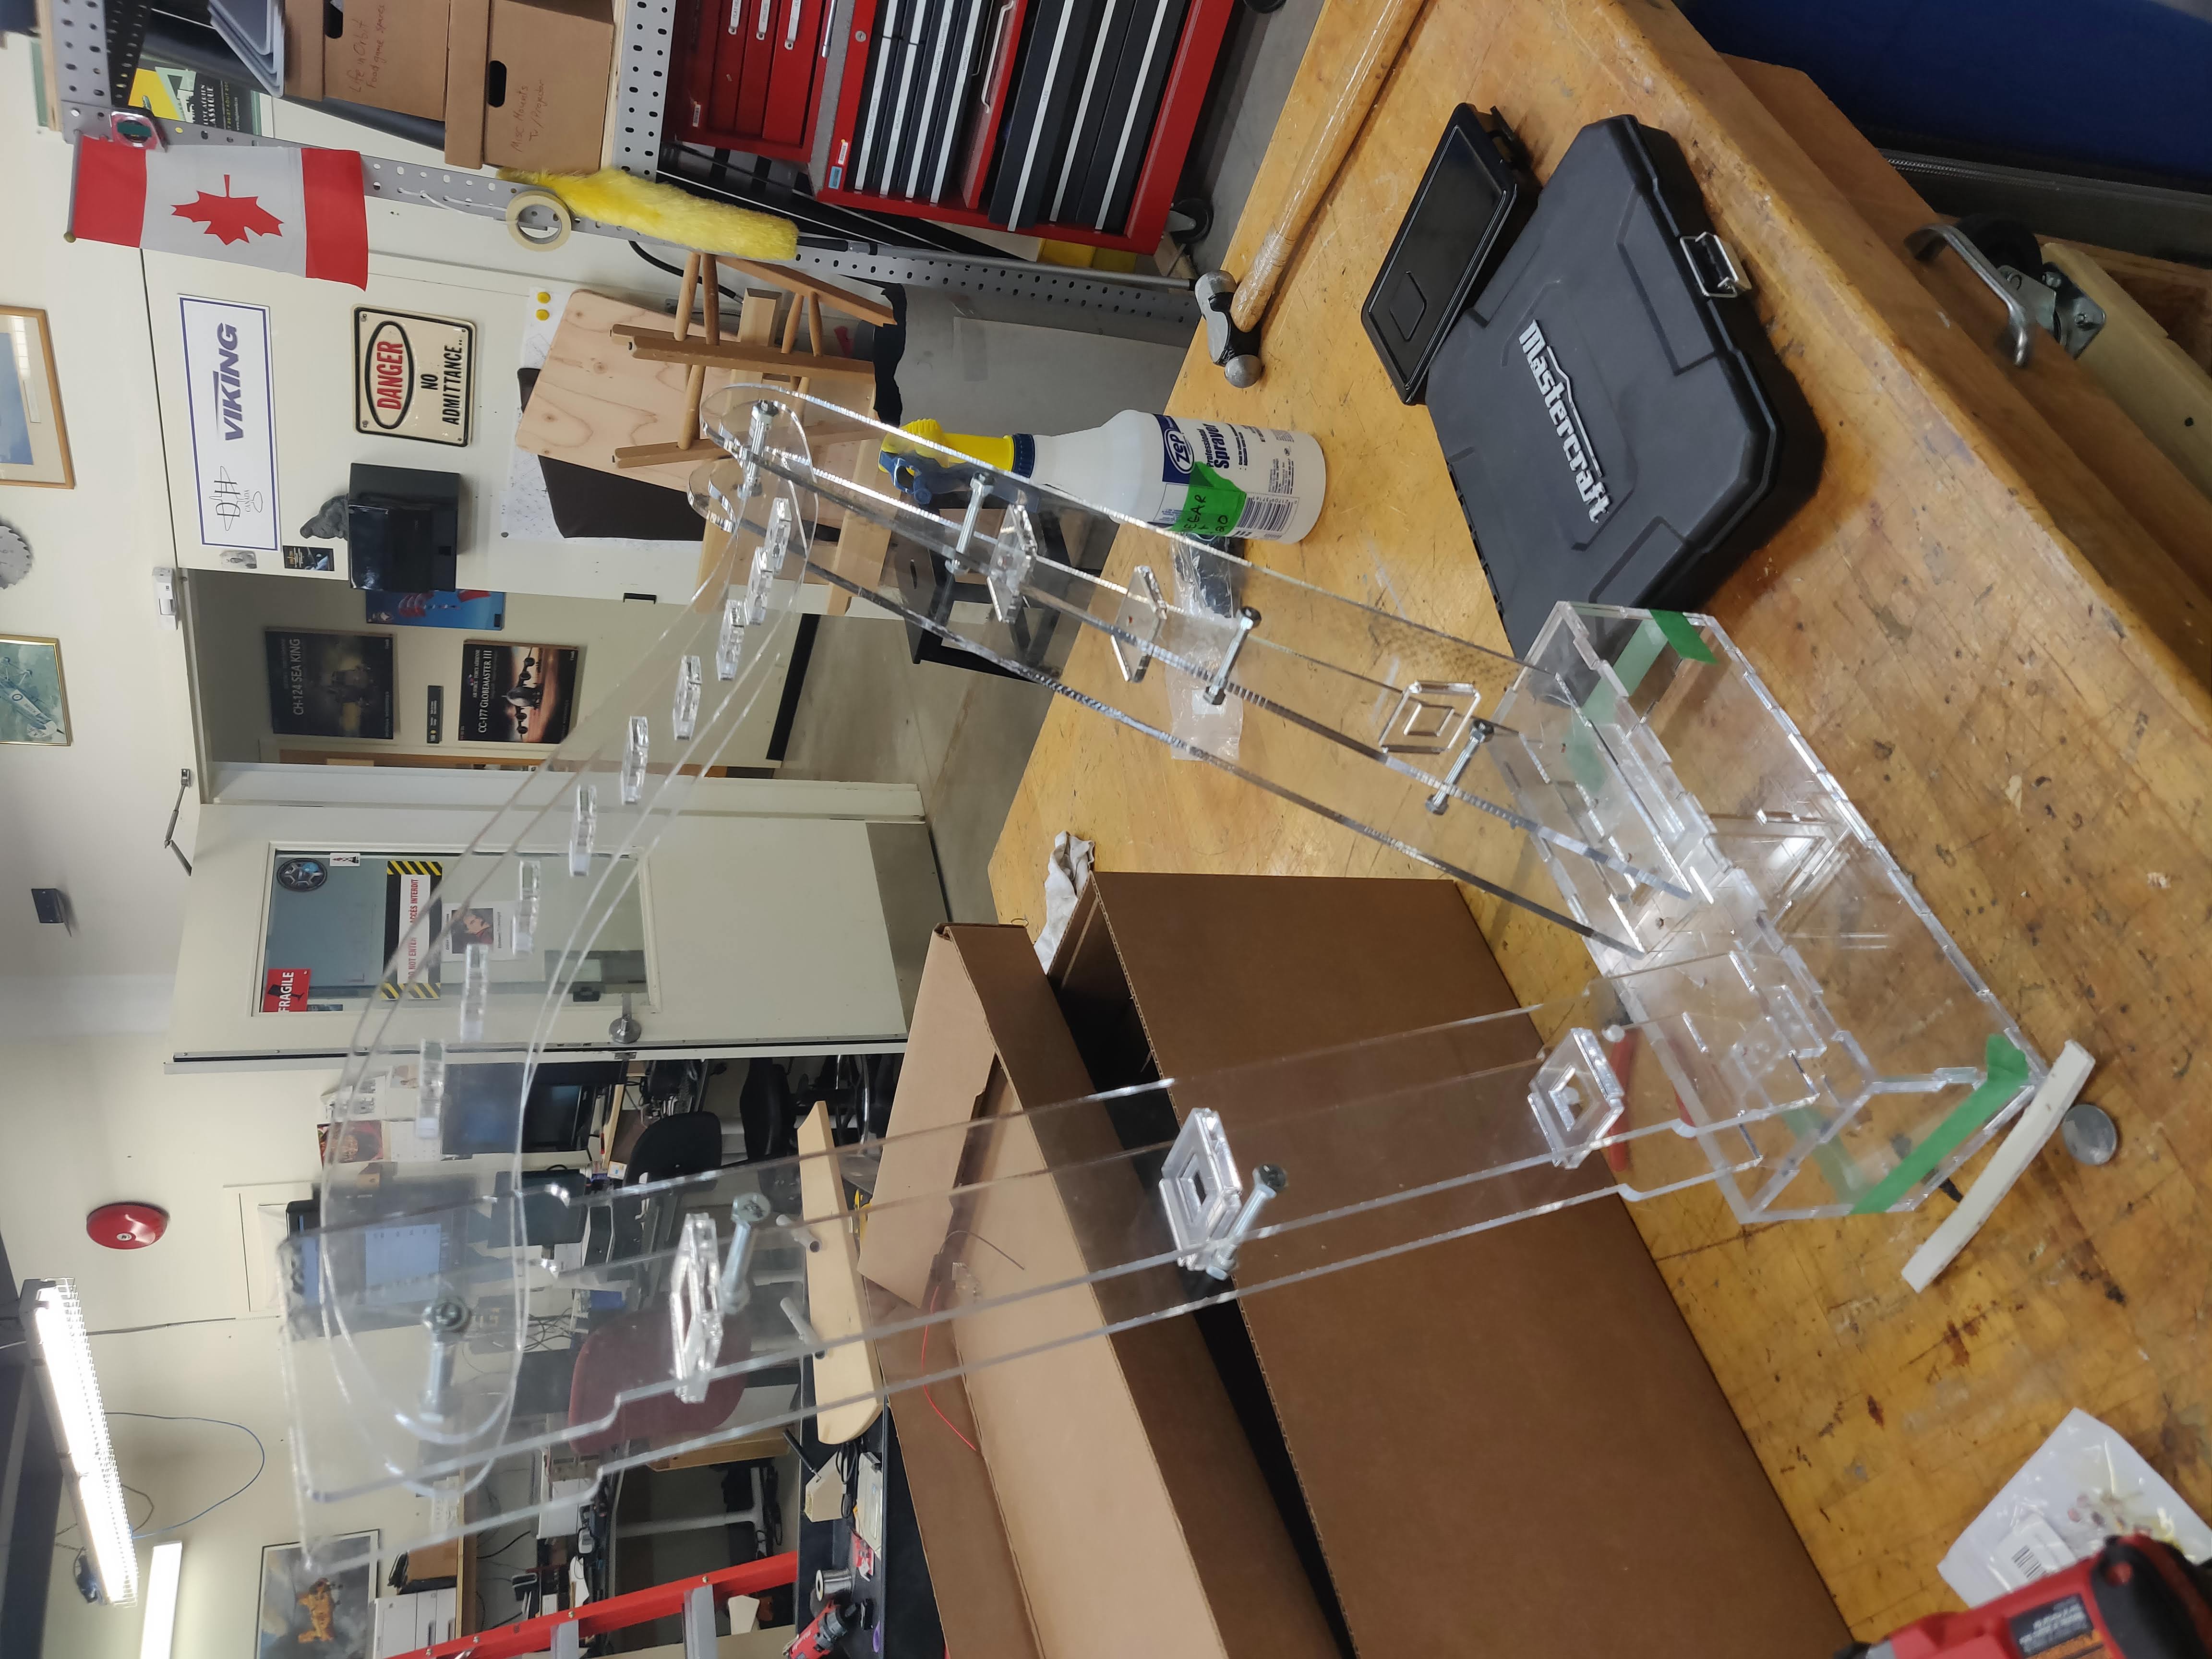 A clear, plastic harp-shaped frame sits on top of a wooden work surface. Tools, boxes, and a computer desk can be seen in the background.